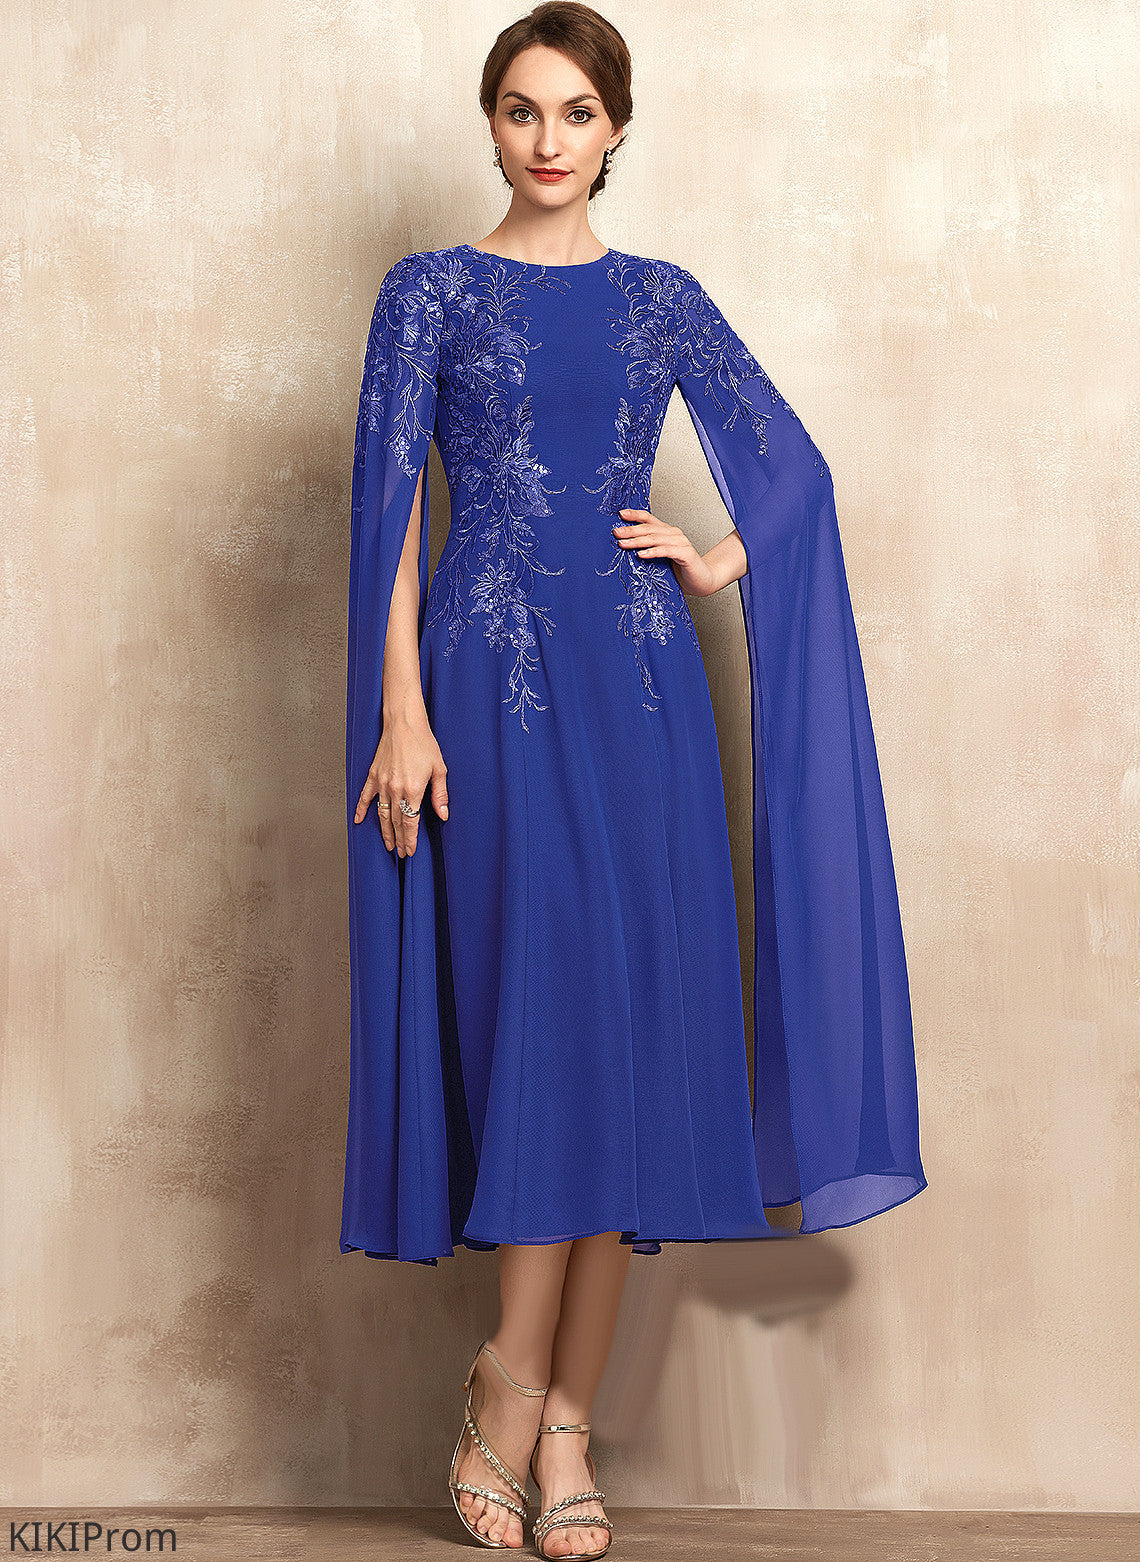 Lace Chiffon of the Mother Bride A-Line Dress With Neck Mother of the Bride Dresses Sequins Tea-Length Juliet Scoop